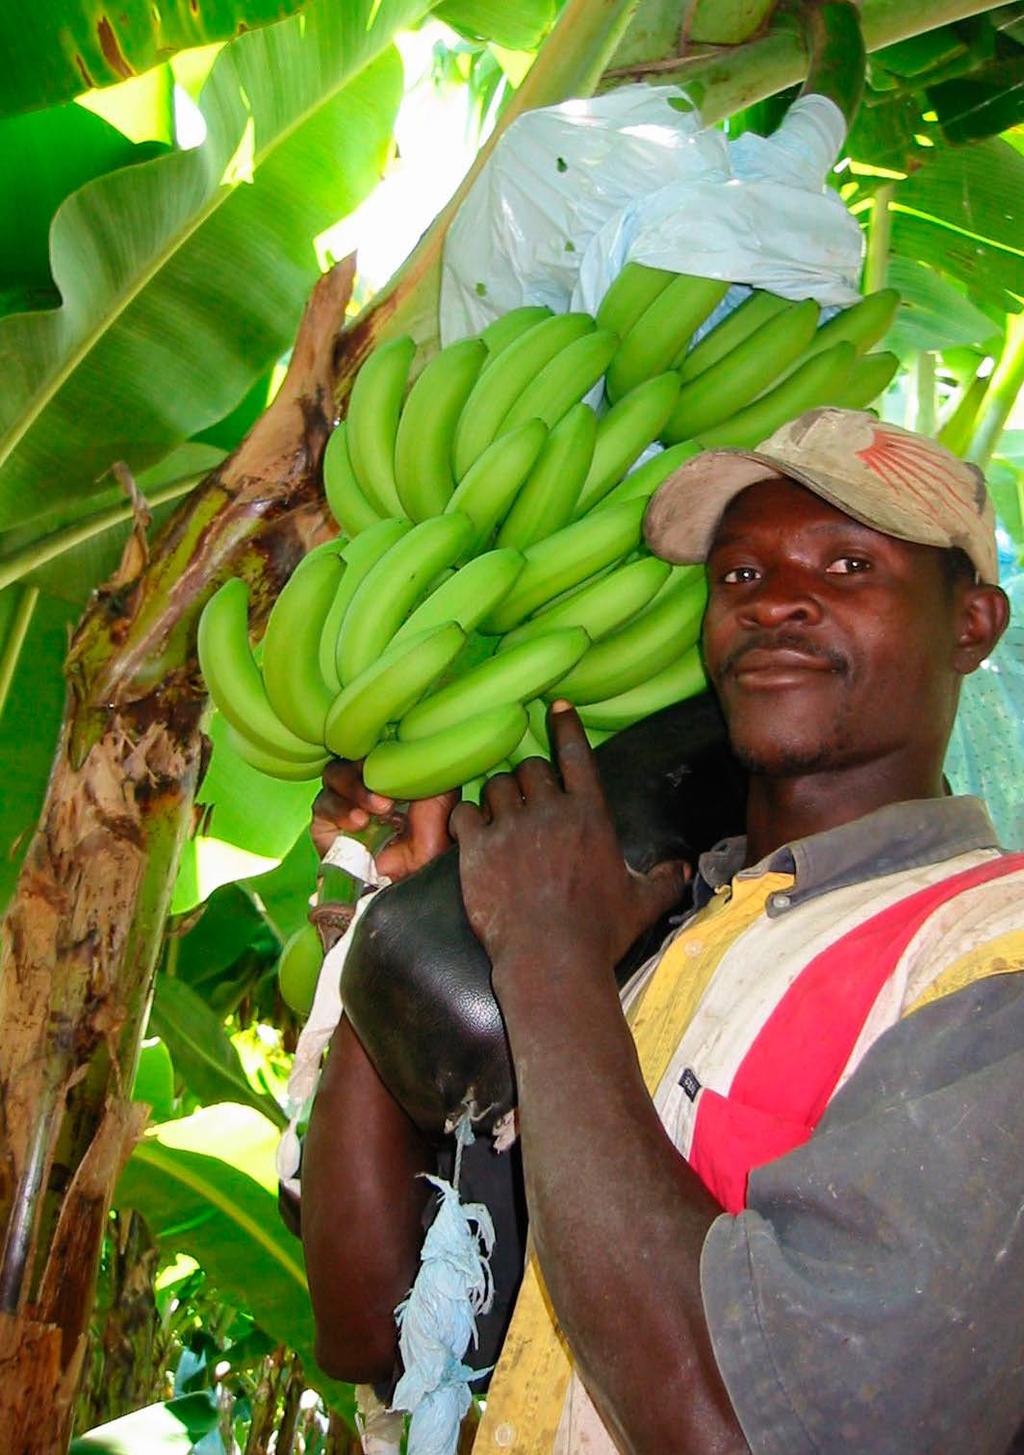 Catering Services have been trying to supply Fairtrade bananas across the campus throughout the year and would prefer them to be the only bananas on offer.